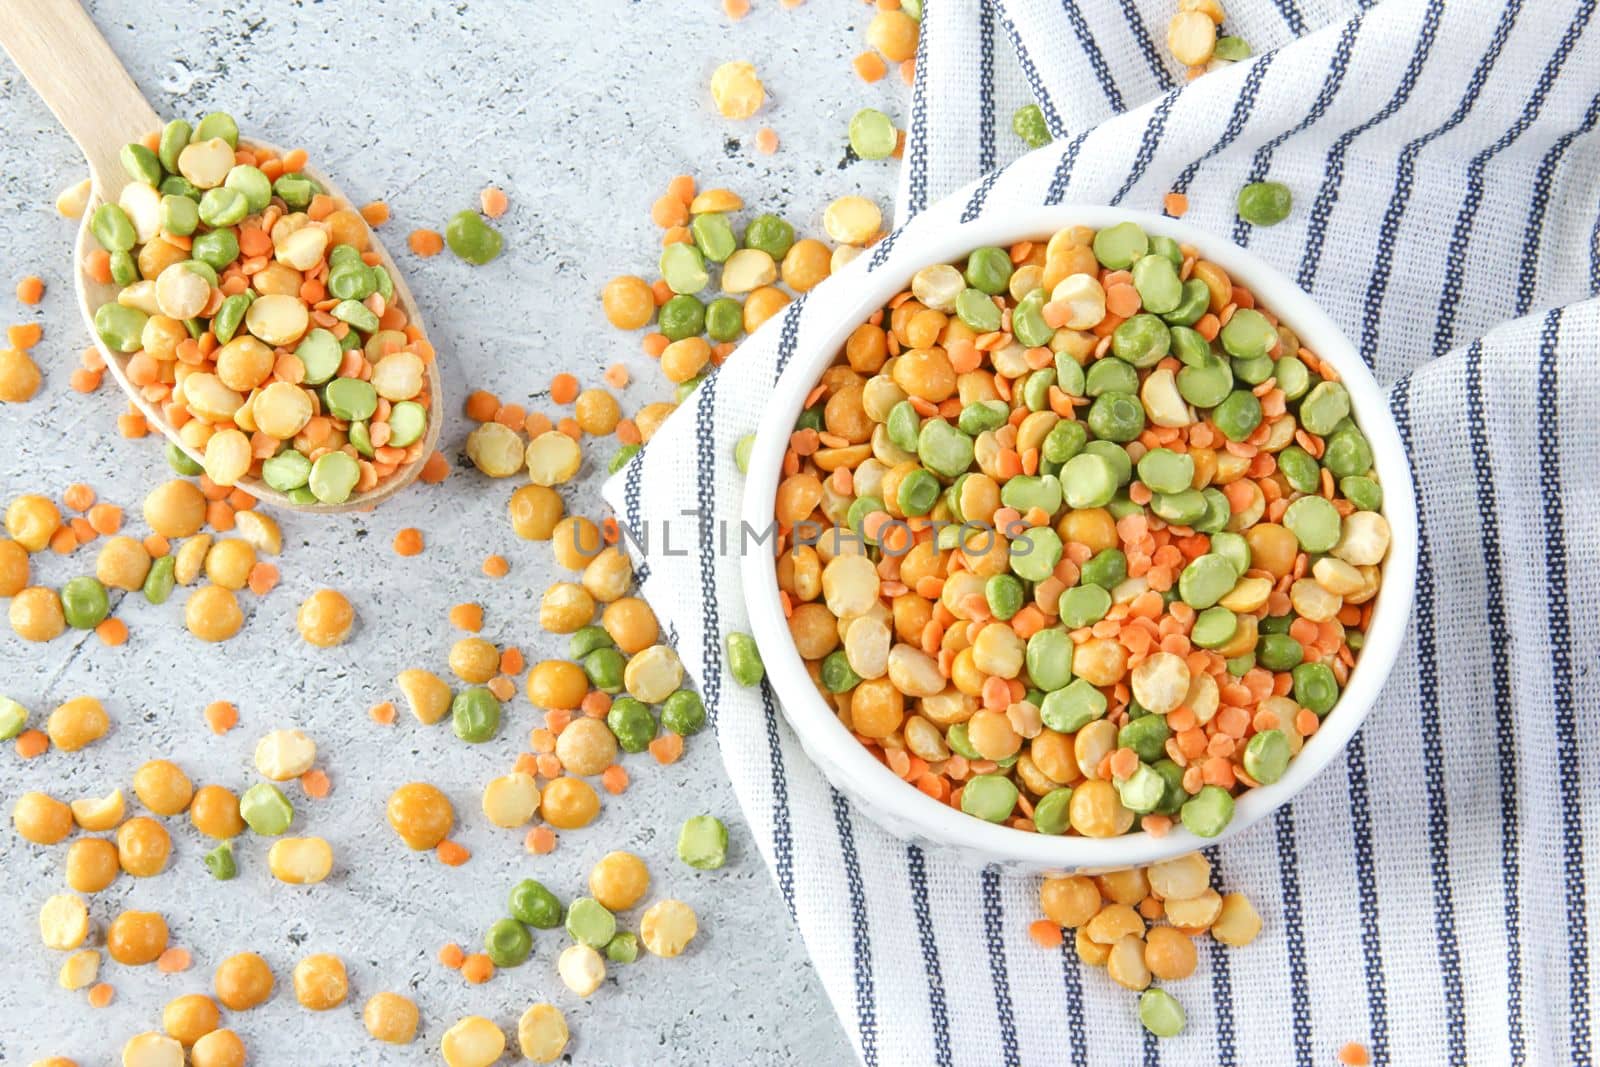 Different types of peas yellow and green in white bowl on a napkin and a light gray stone background, close up, top view.